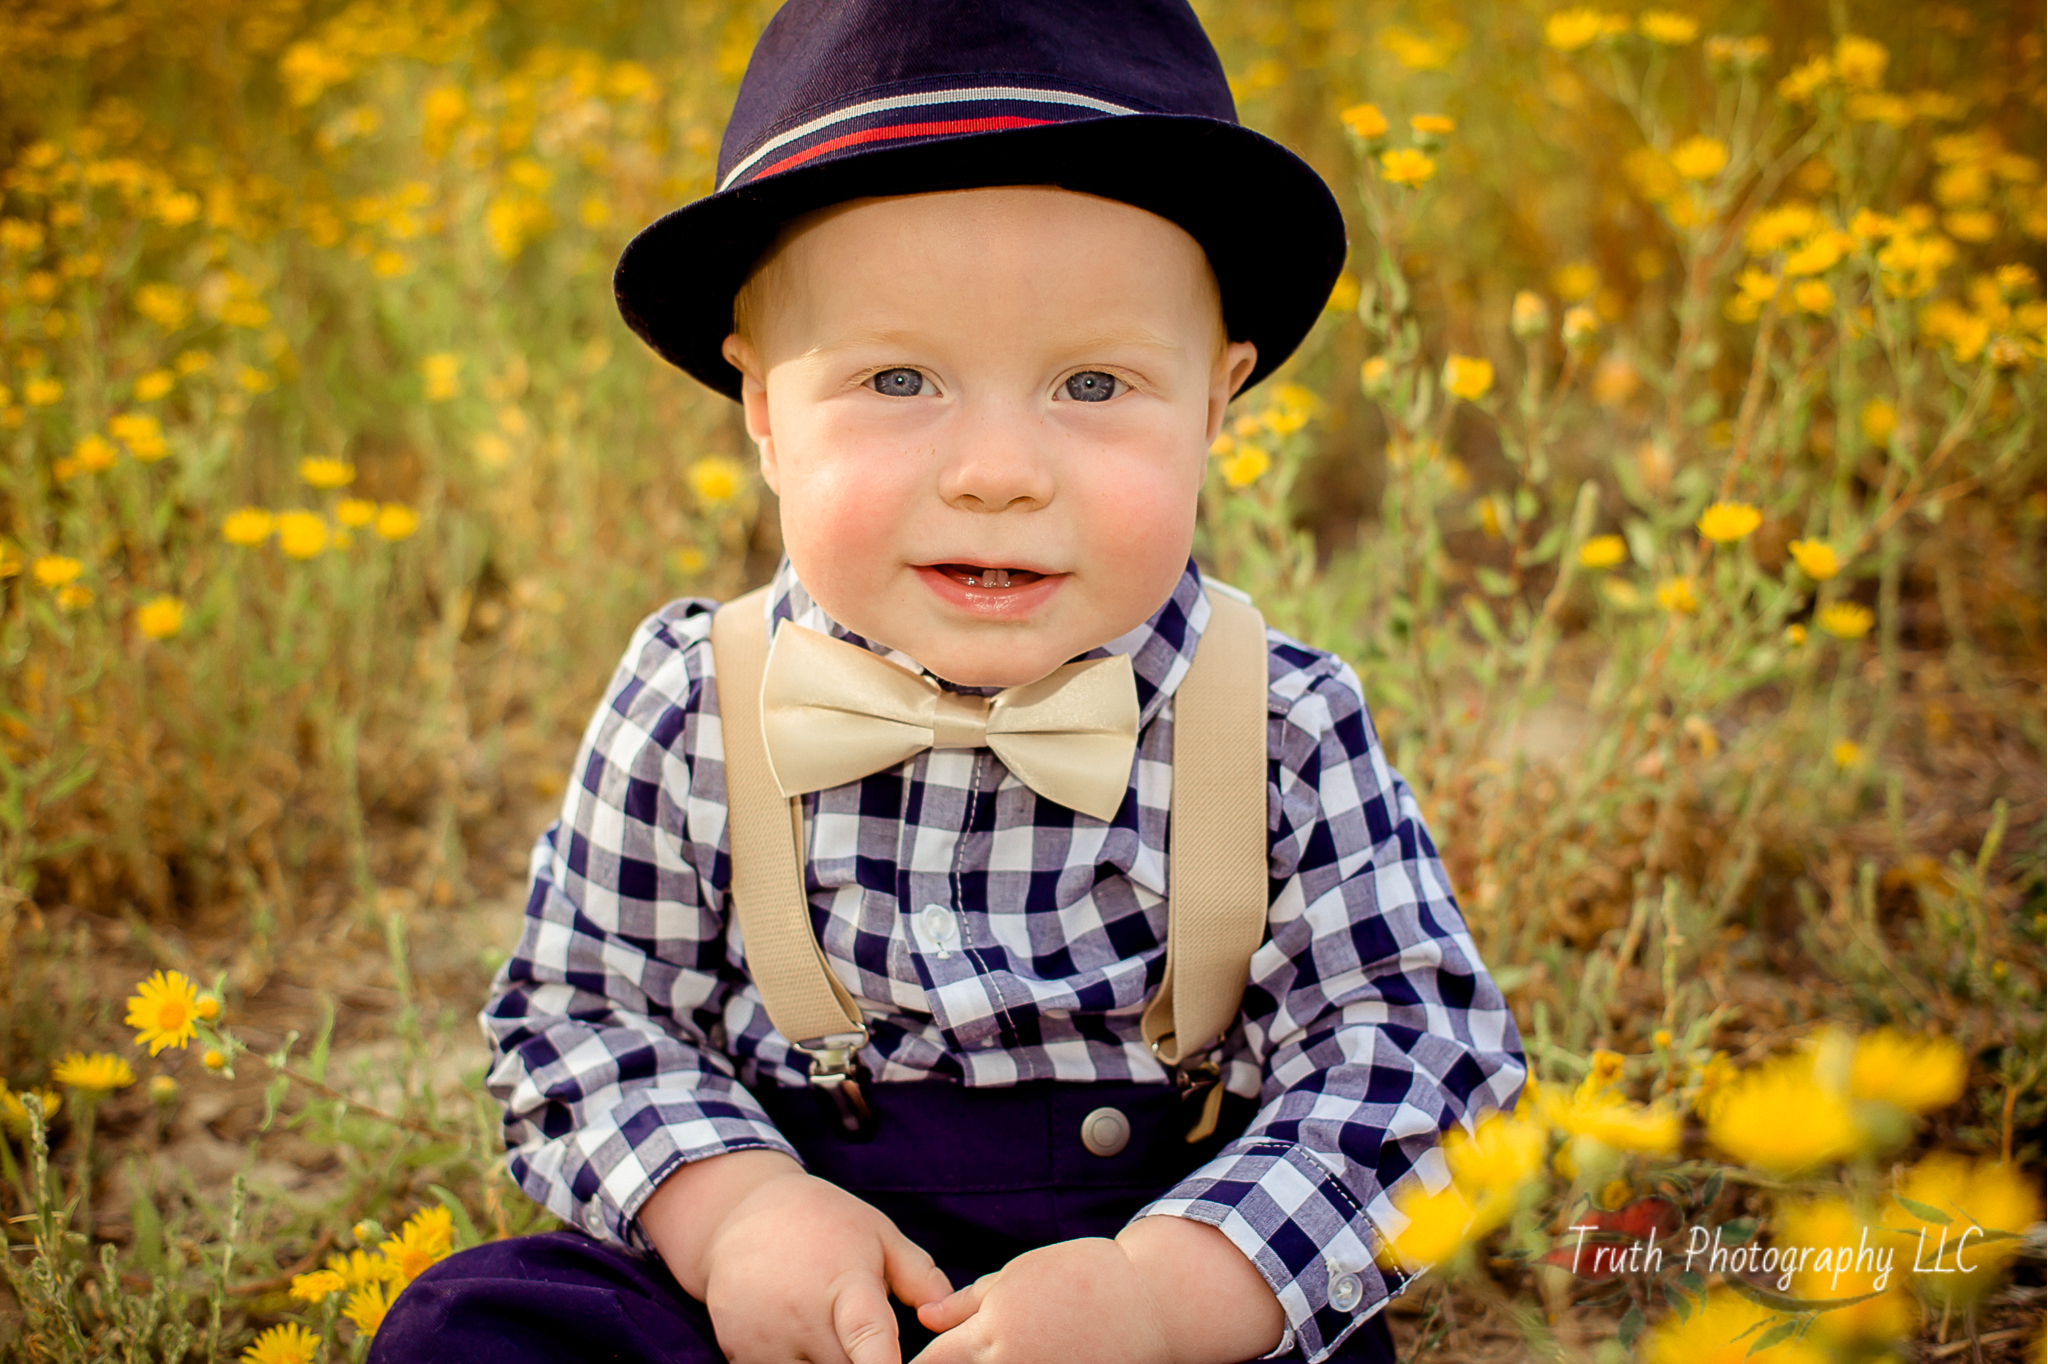 Truth-Photography-Westminster-baby-photograph.jpg